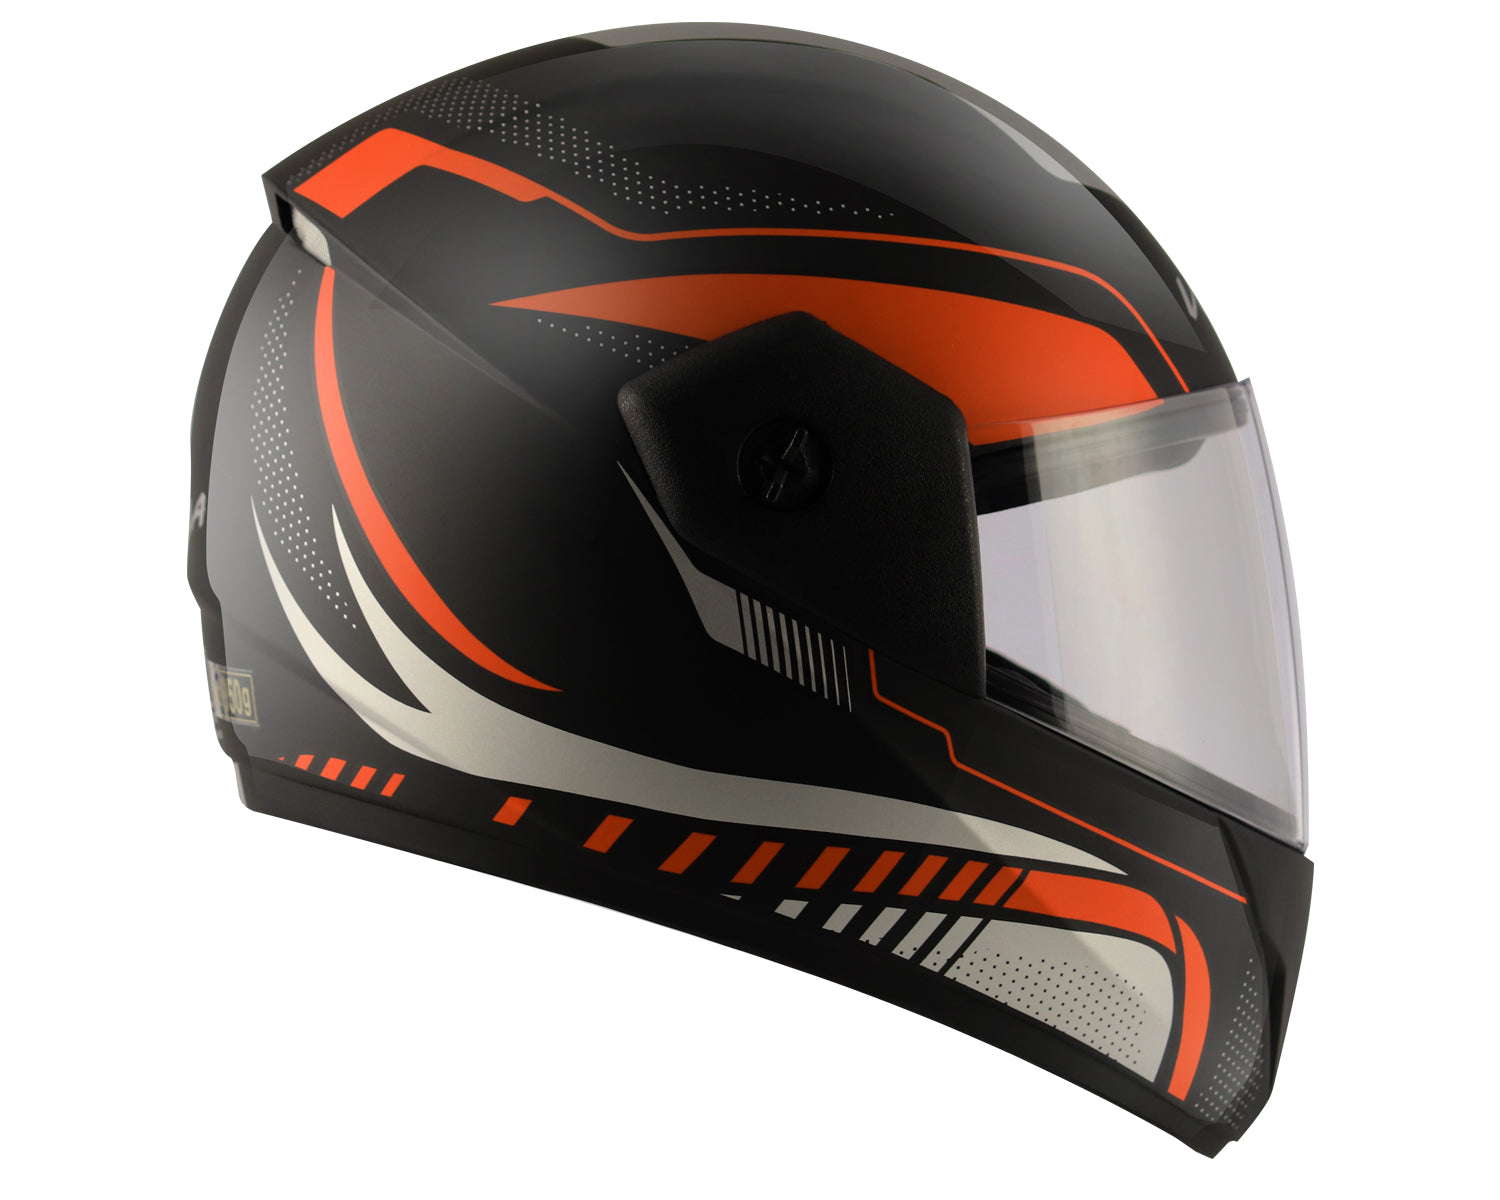 which scooter can fit the vega bolt helmet in it's boot space? :  r/indianbikes